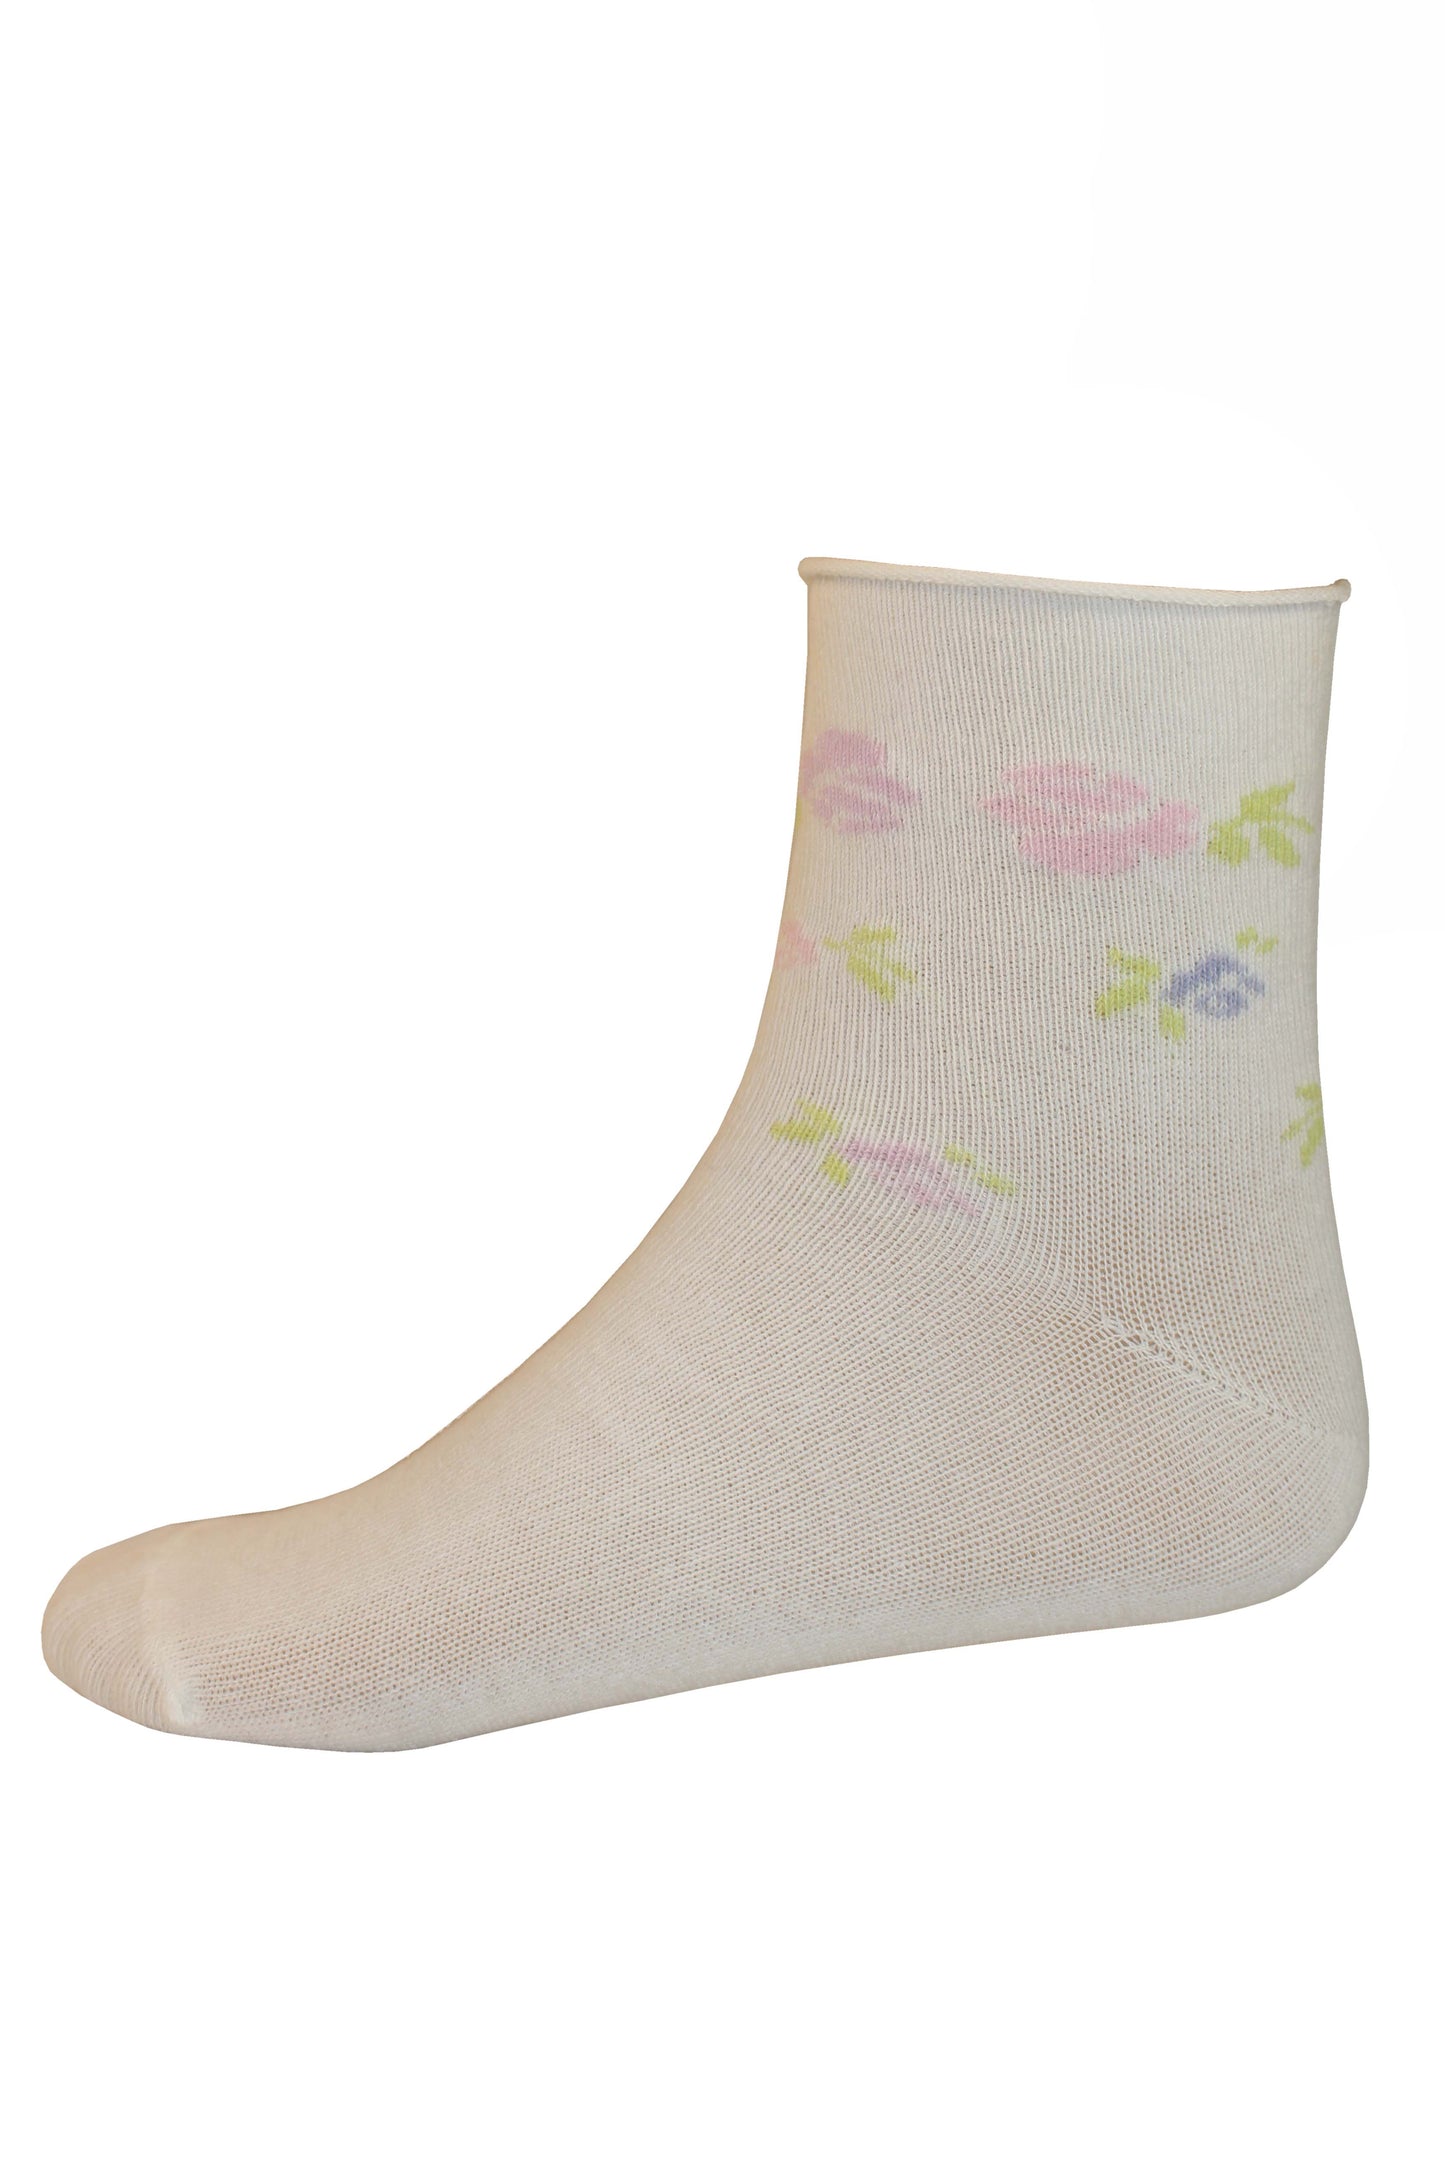 Omsa Serenella Pic Nic Calzino - Ivory cream children's cotton no cuff cotton ankle socks with a colourful woven floral style pattern around the cuff in shades of pink, purple and lime green.